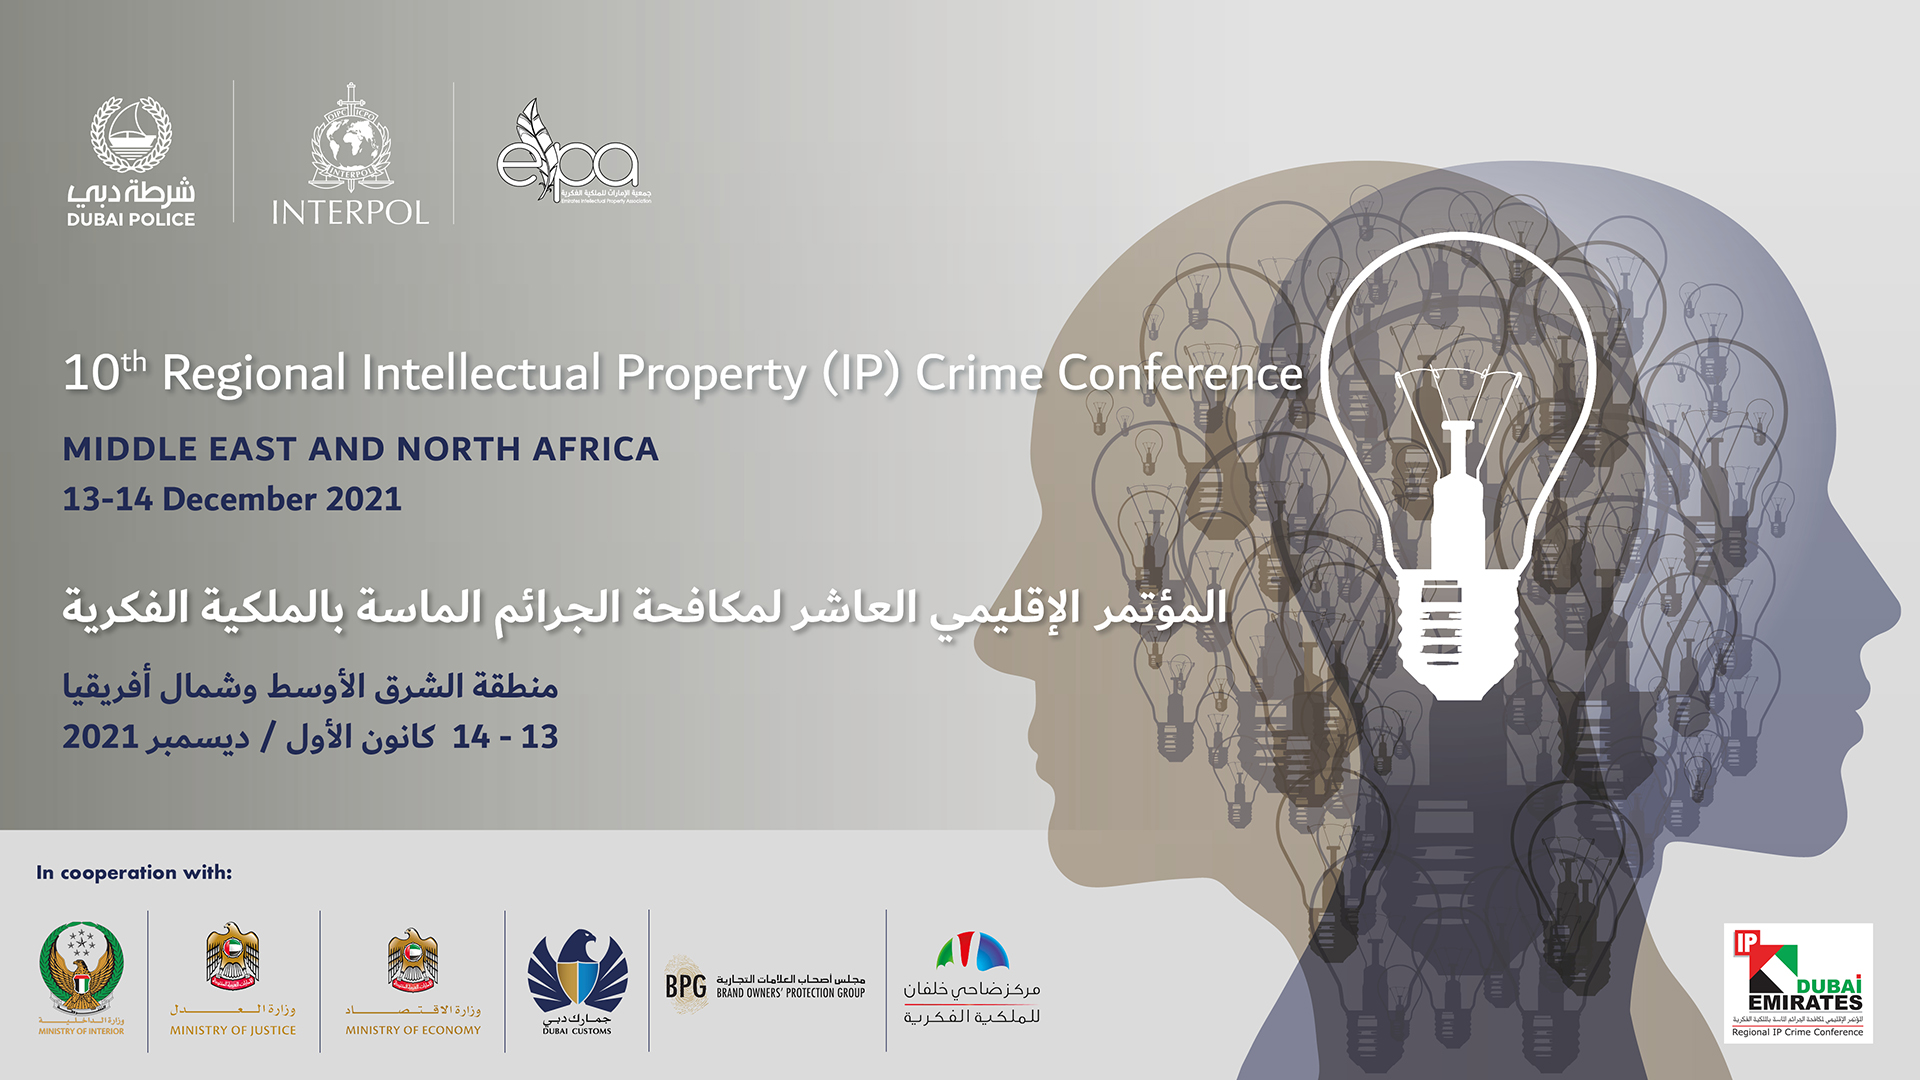 Poster - 10th IP Crime Conference, Middle East and North Africa